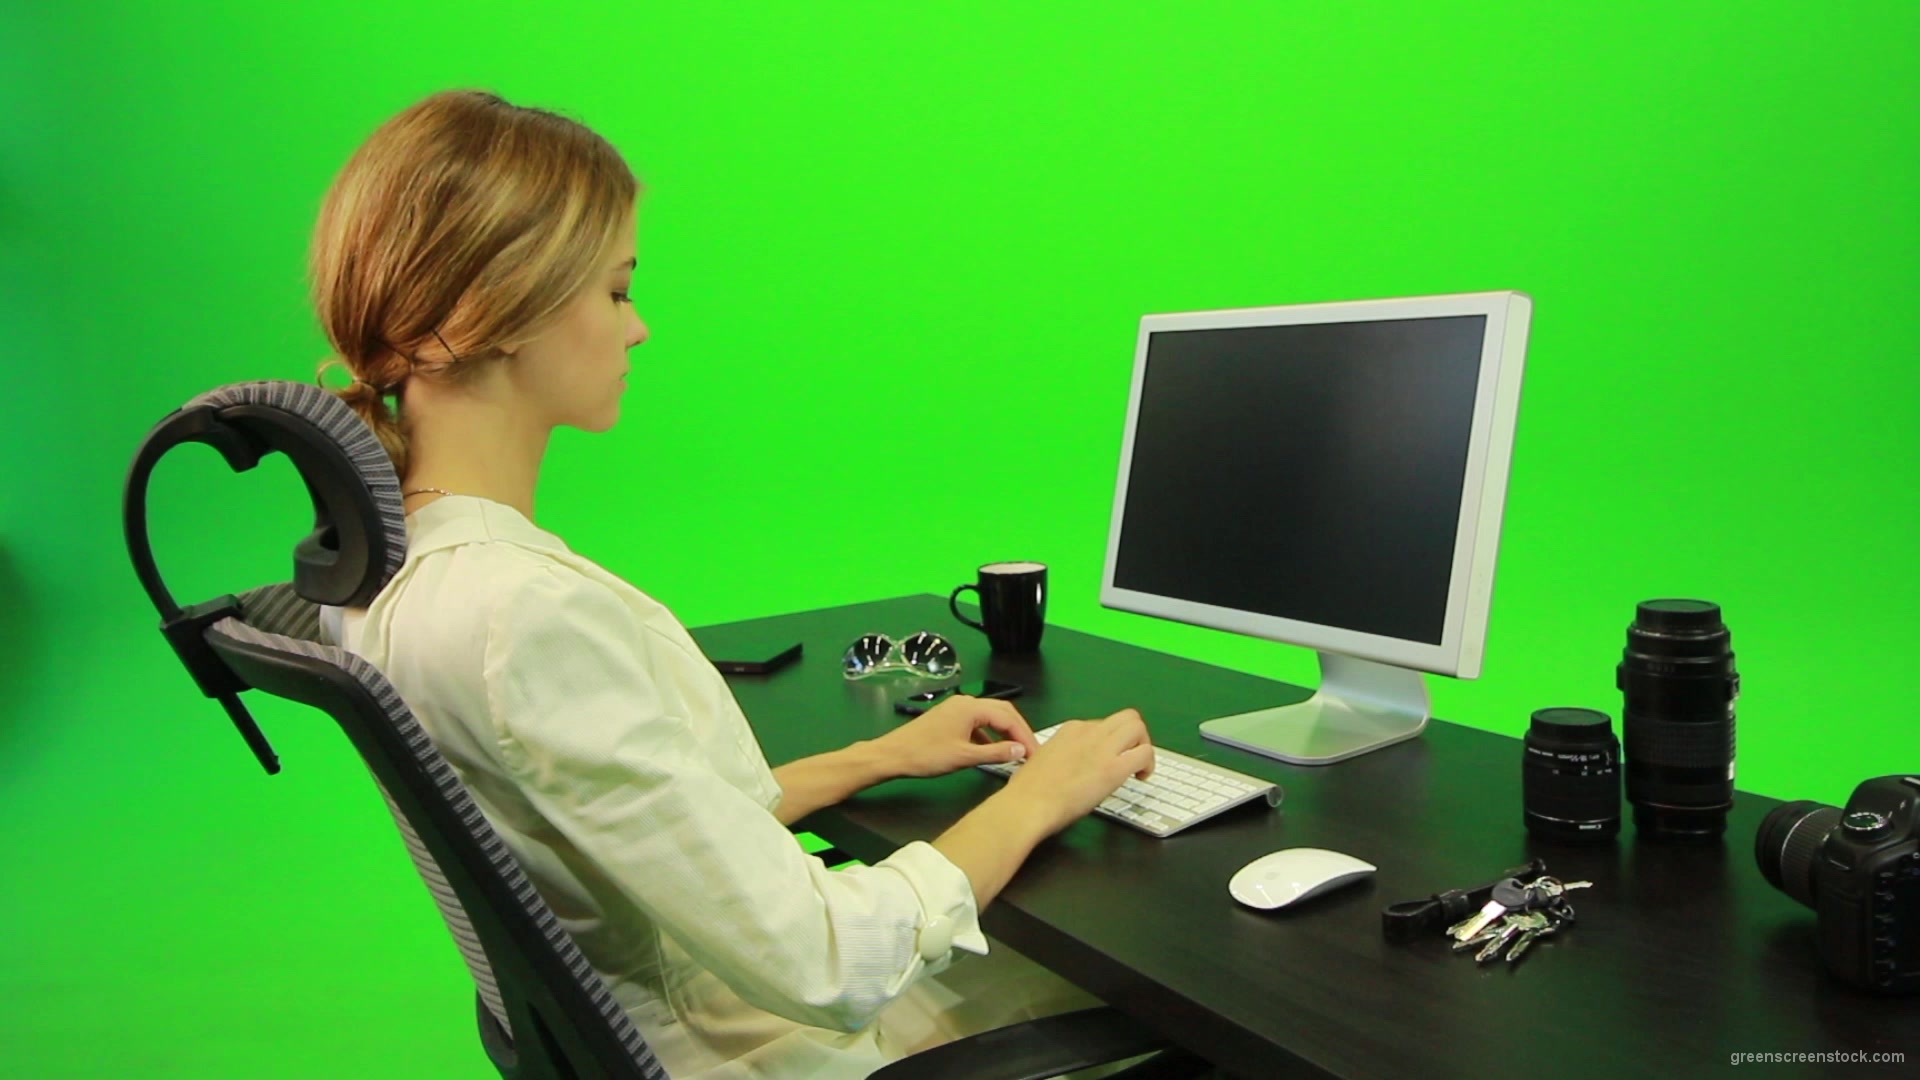 Woman-Working-on-the-Computer-4-Green-Screen-Footage_002 Green Screen Stock